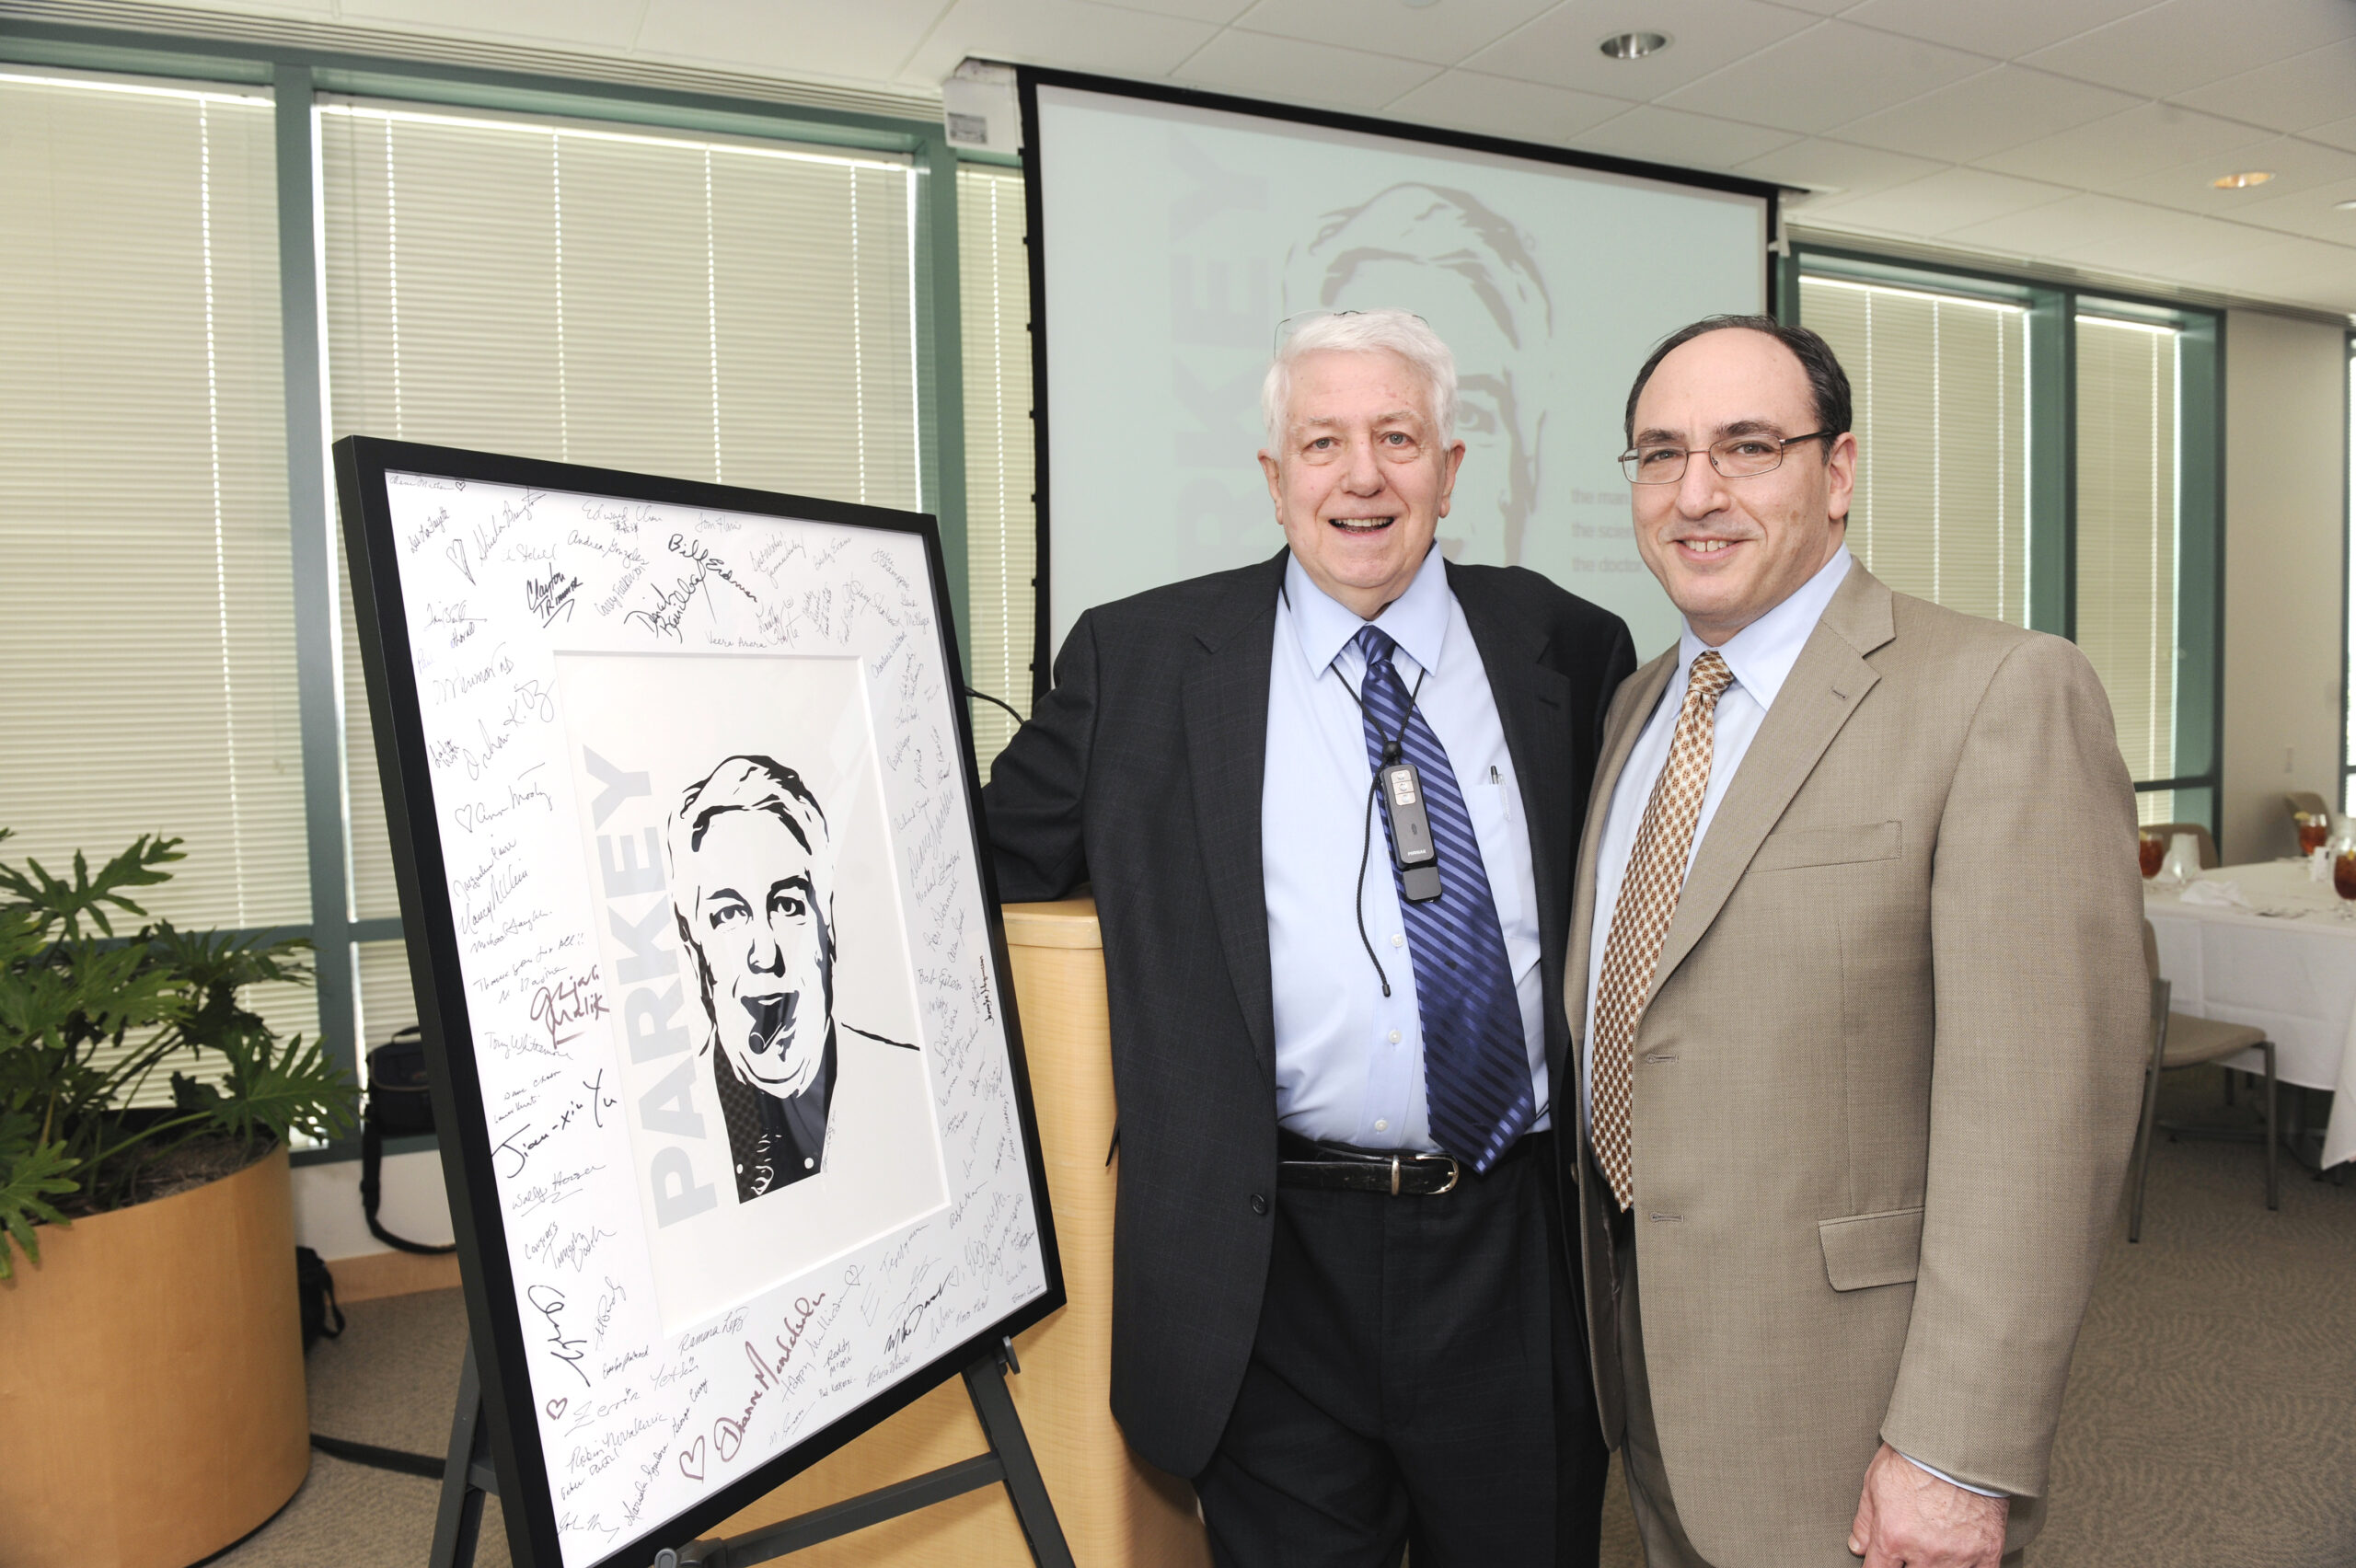 Robert W. Parkey stands next to a piece of artwork in his likeness.